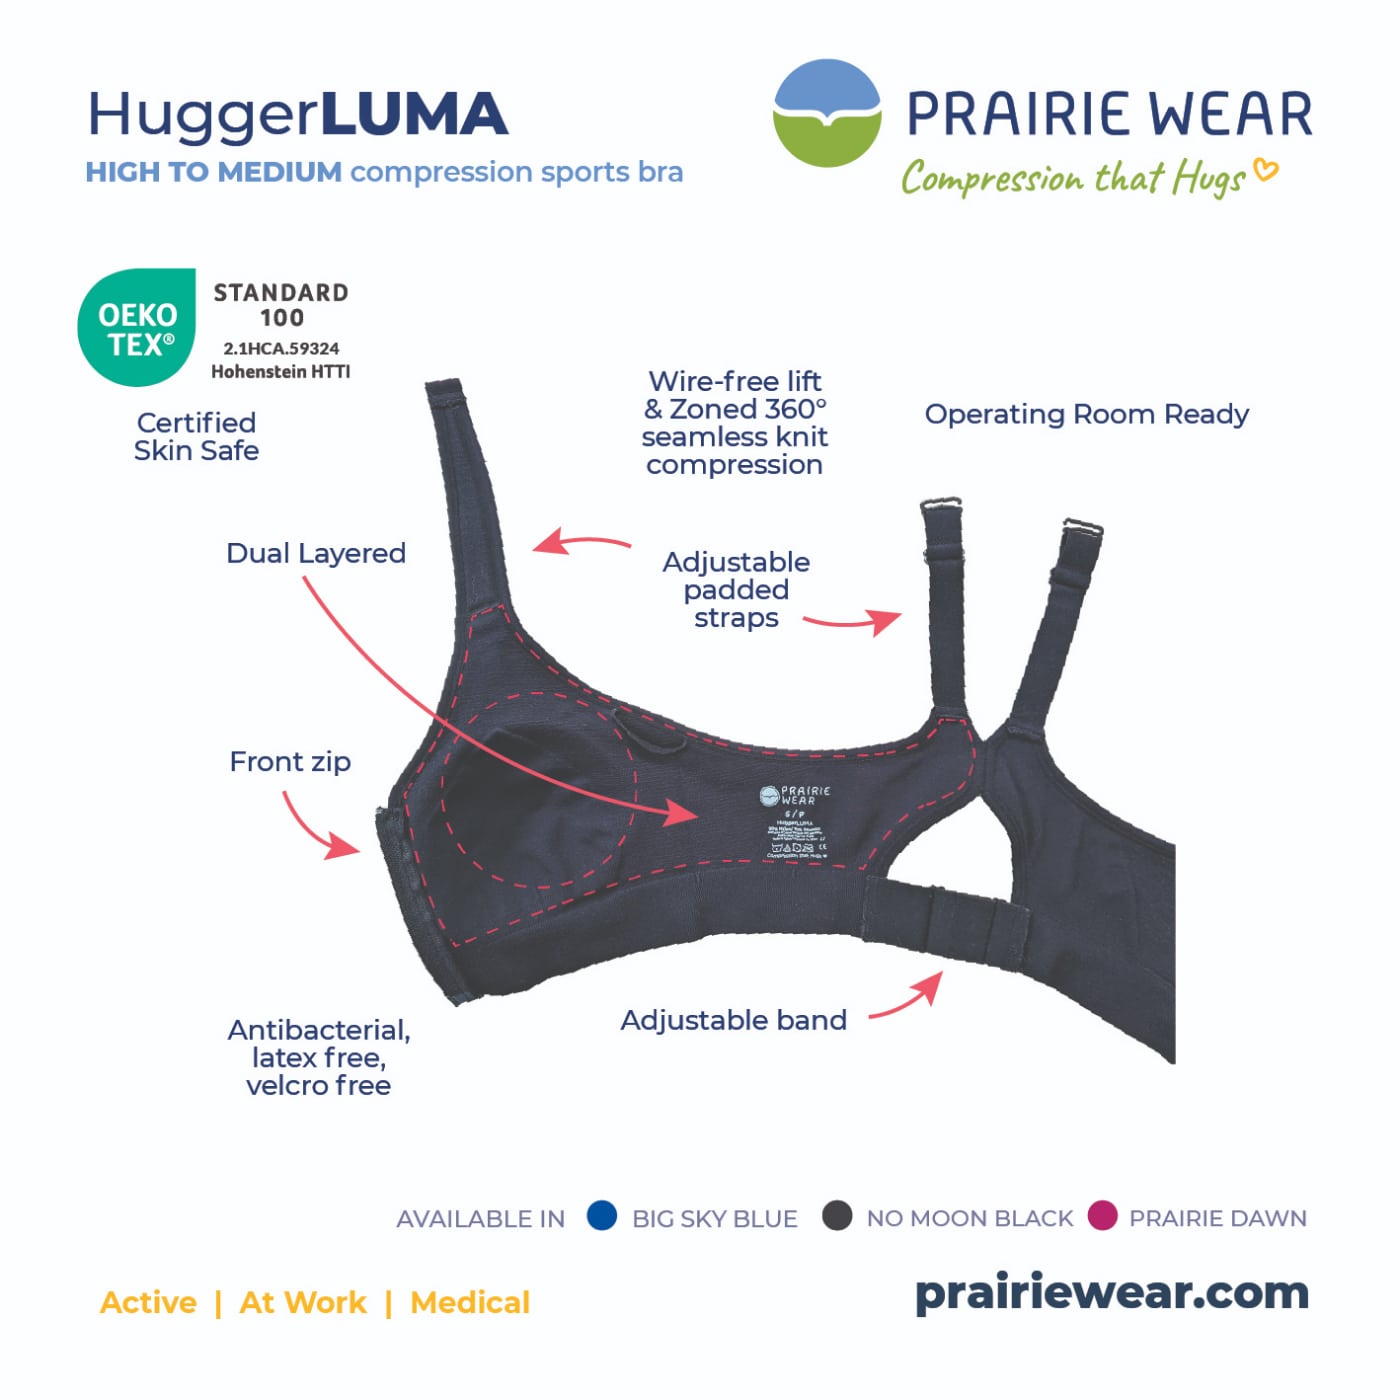 The Luna sports bra has wide, adjustable straps that are great for